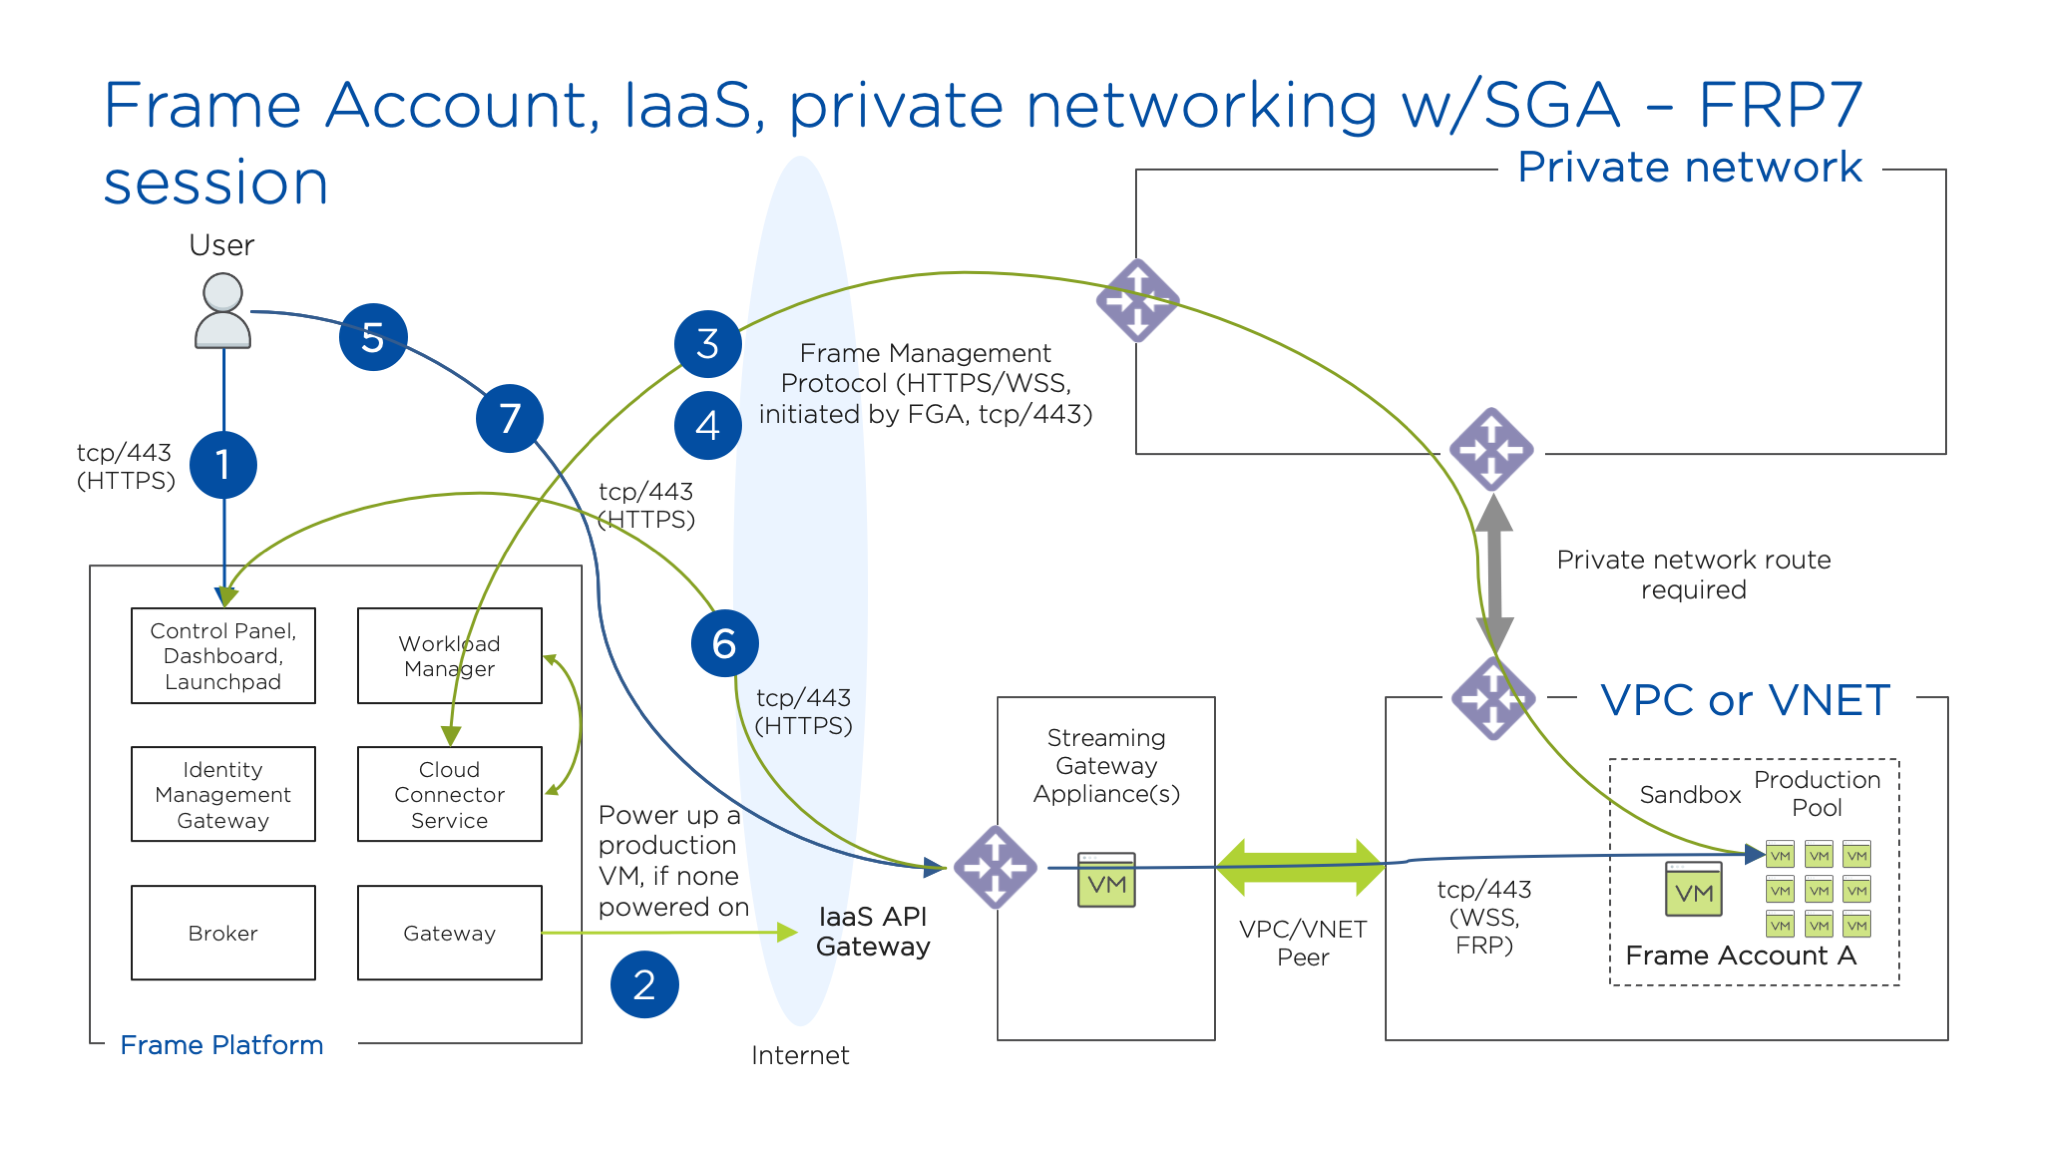 Public IaaS - Private Networking with SGA (FRP7)